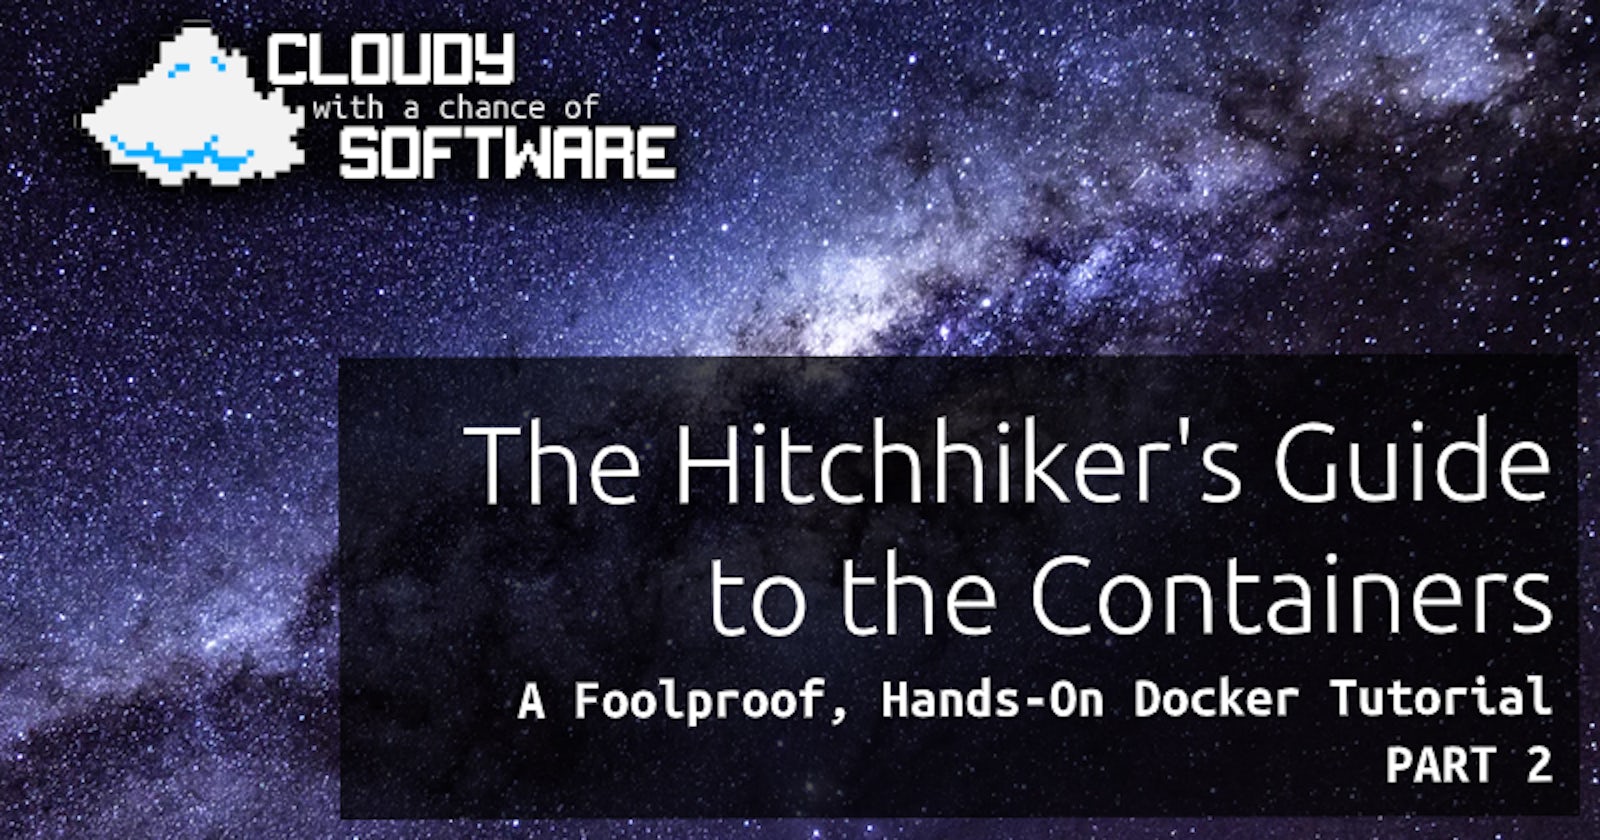 The Hitchhiker's Guide to the Containers: A Foolproof, Hands-on Docker Tutorial (Part 2)